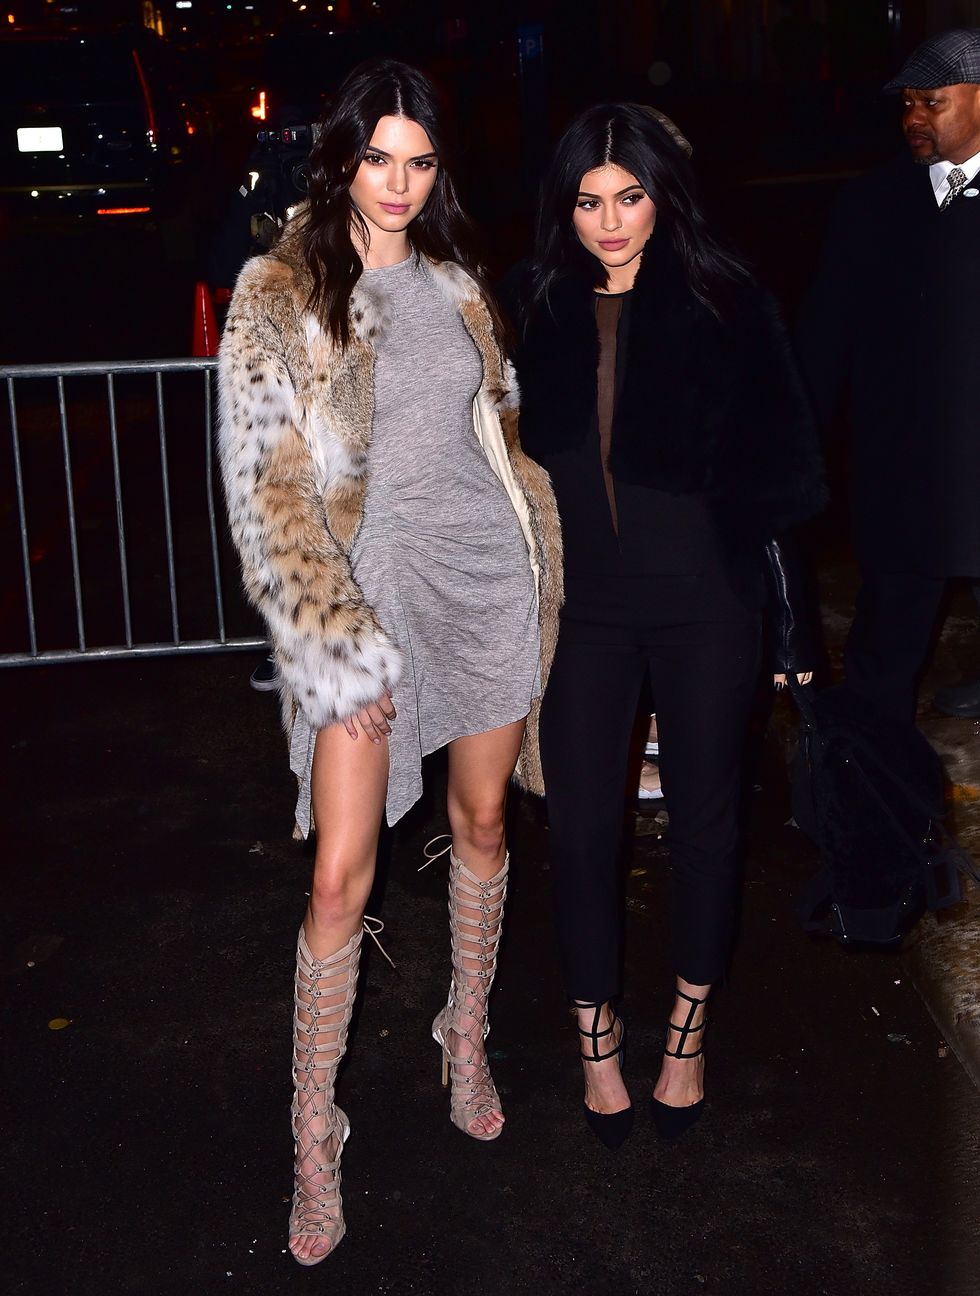 Kendall Jenner and Kylie Jenner at their clothing collection launch